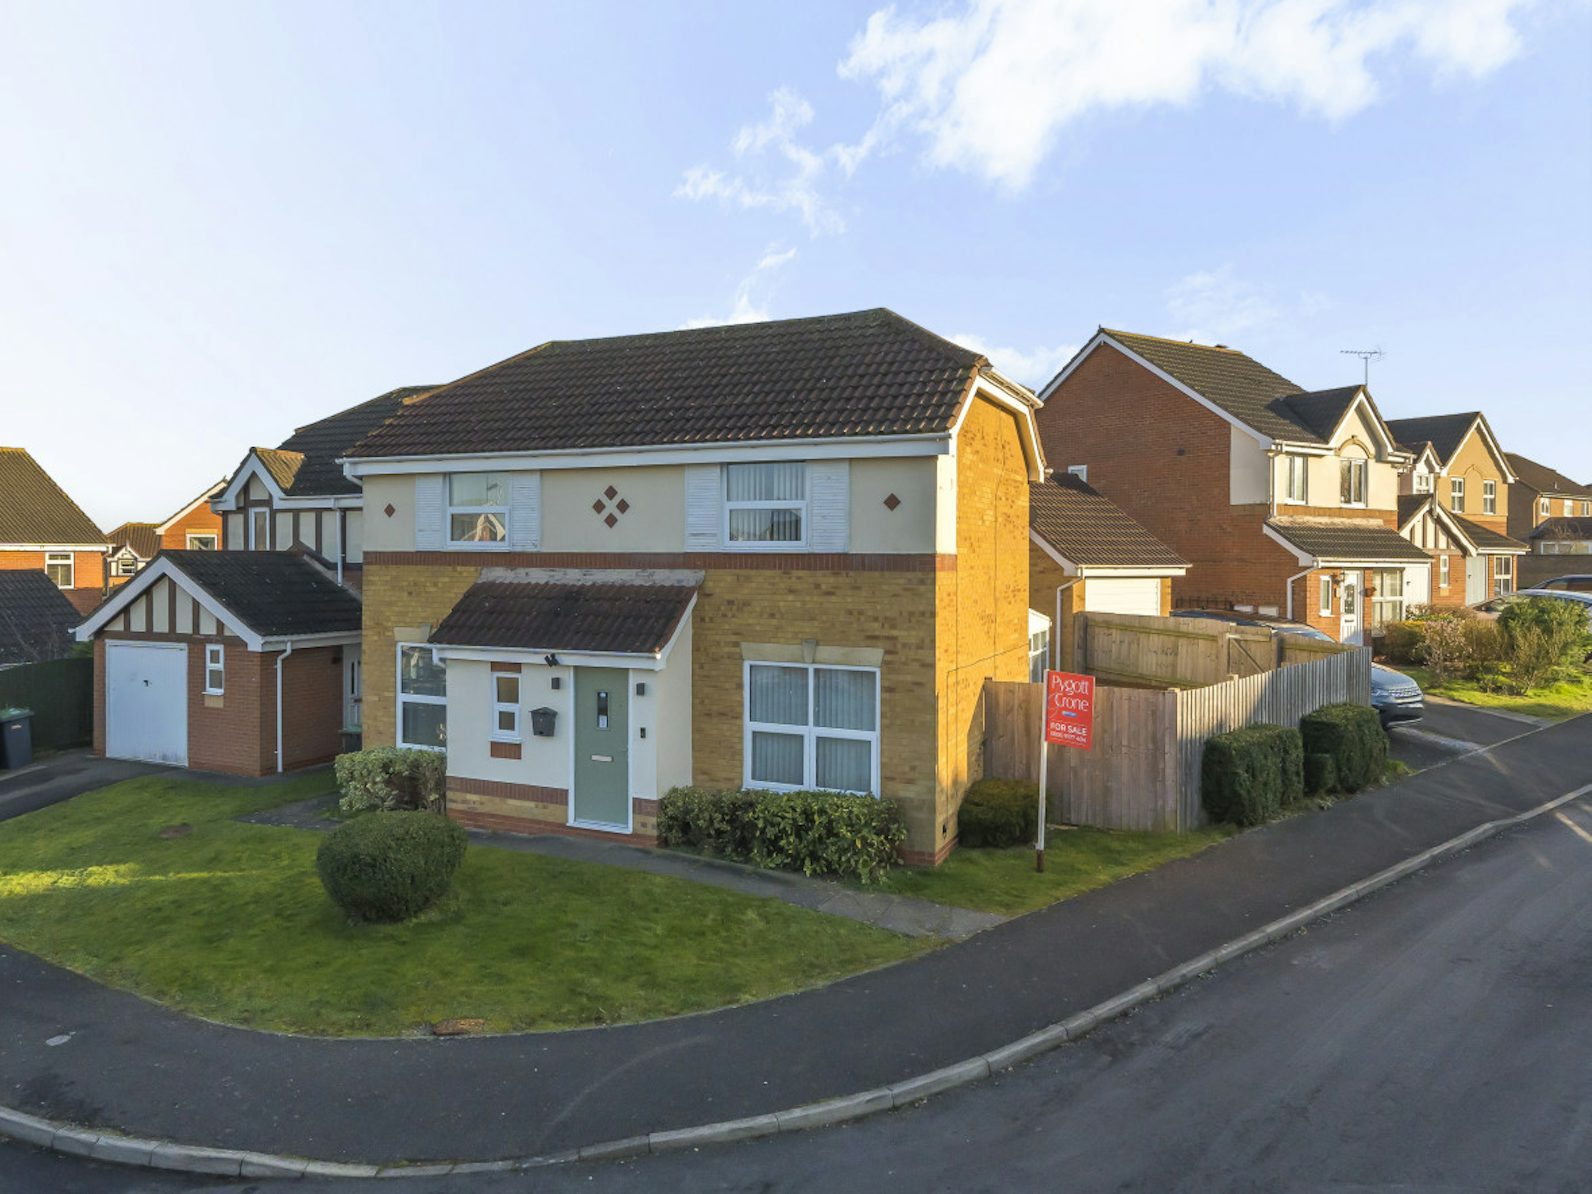 Detached House to rent on Eagle Drive Sleaford, NG34